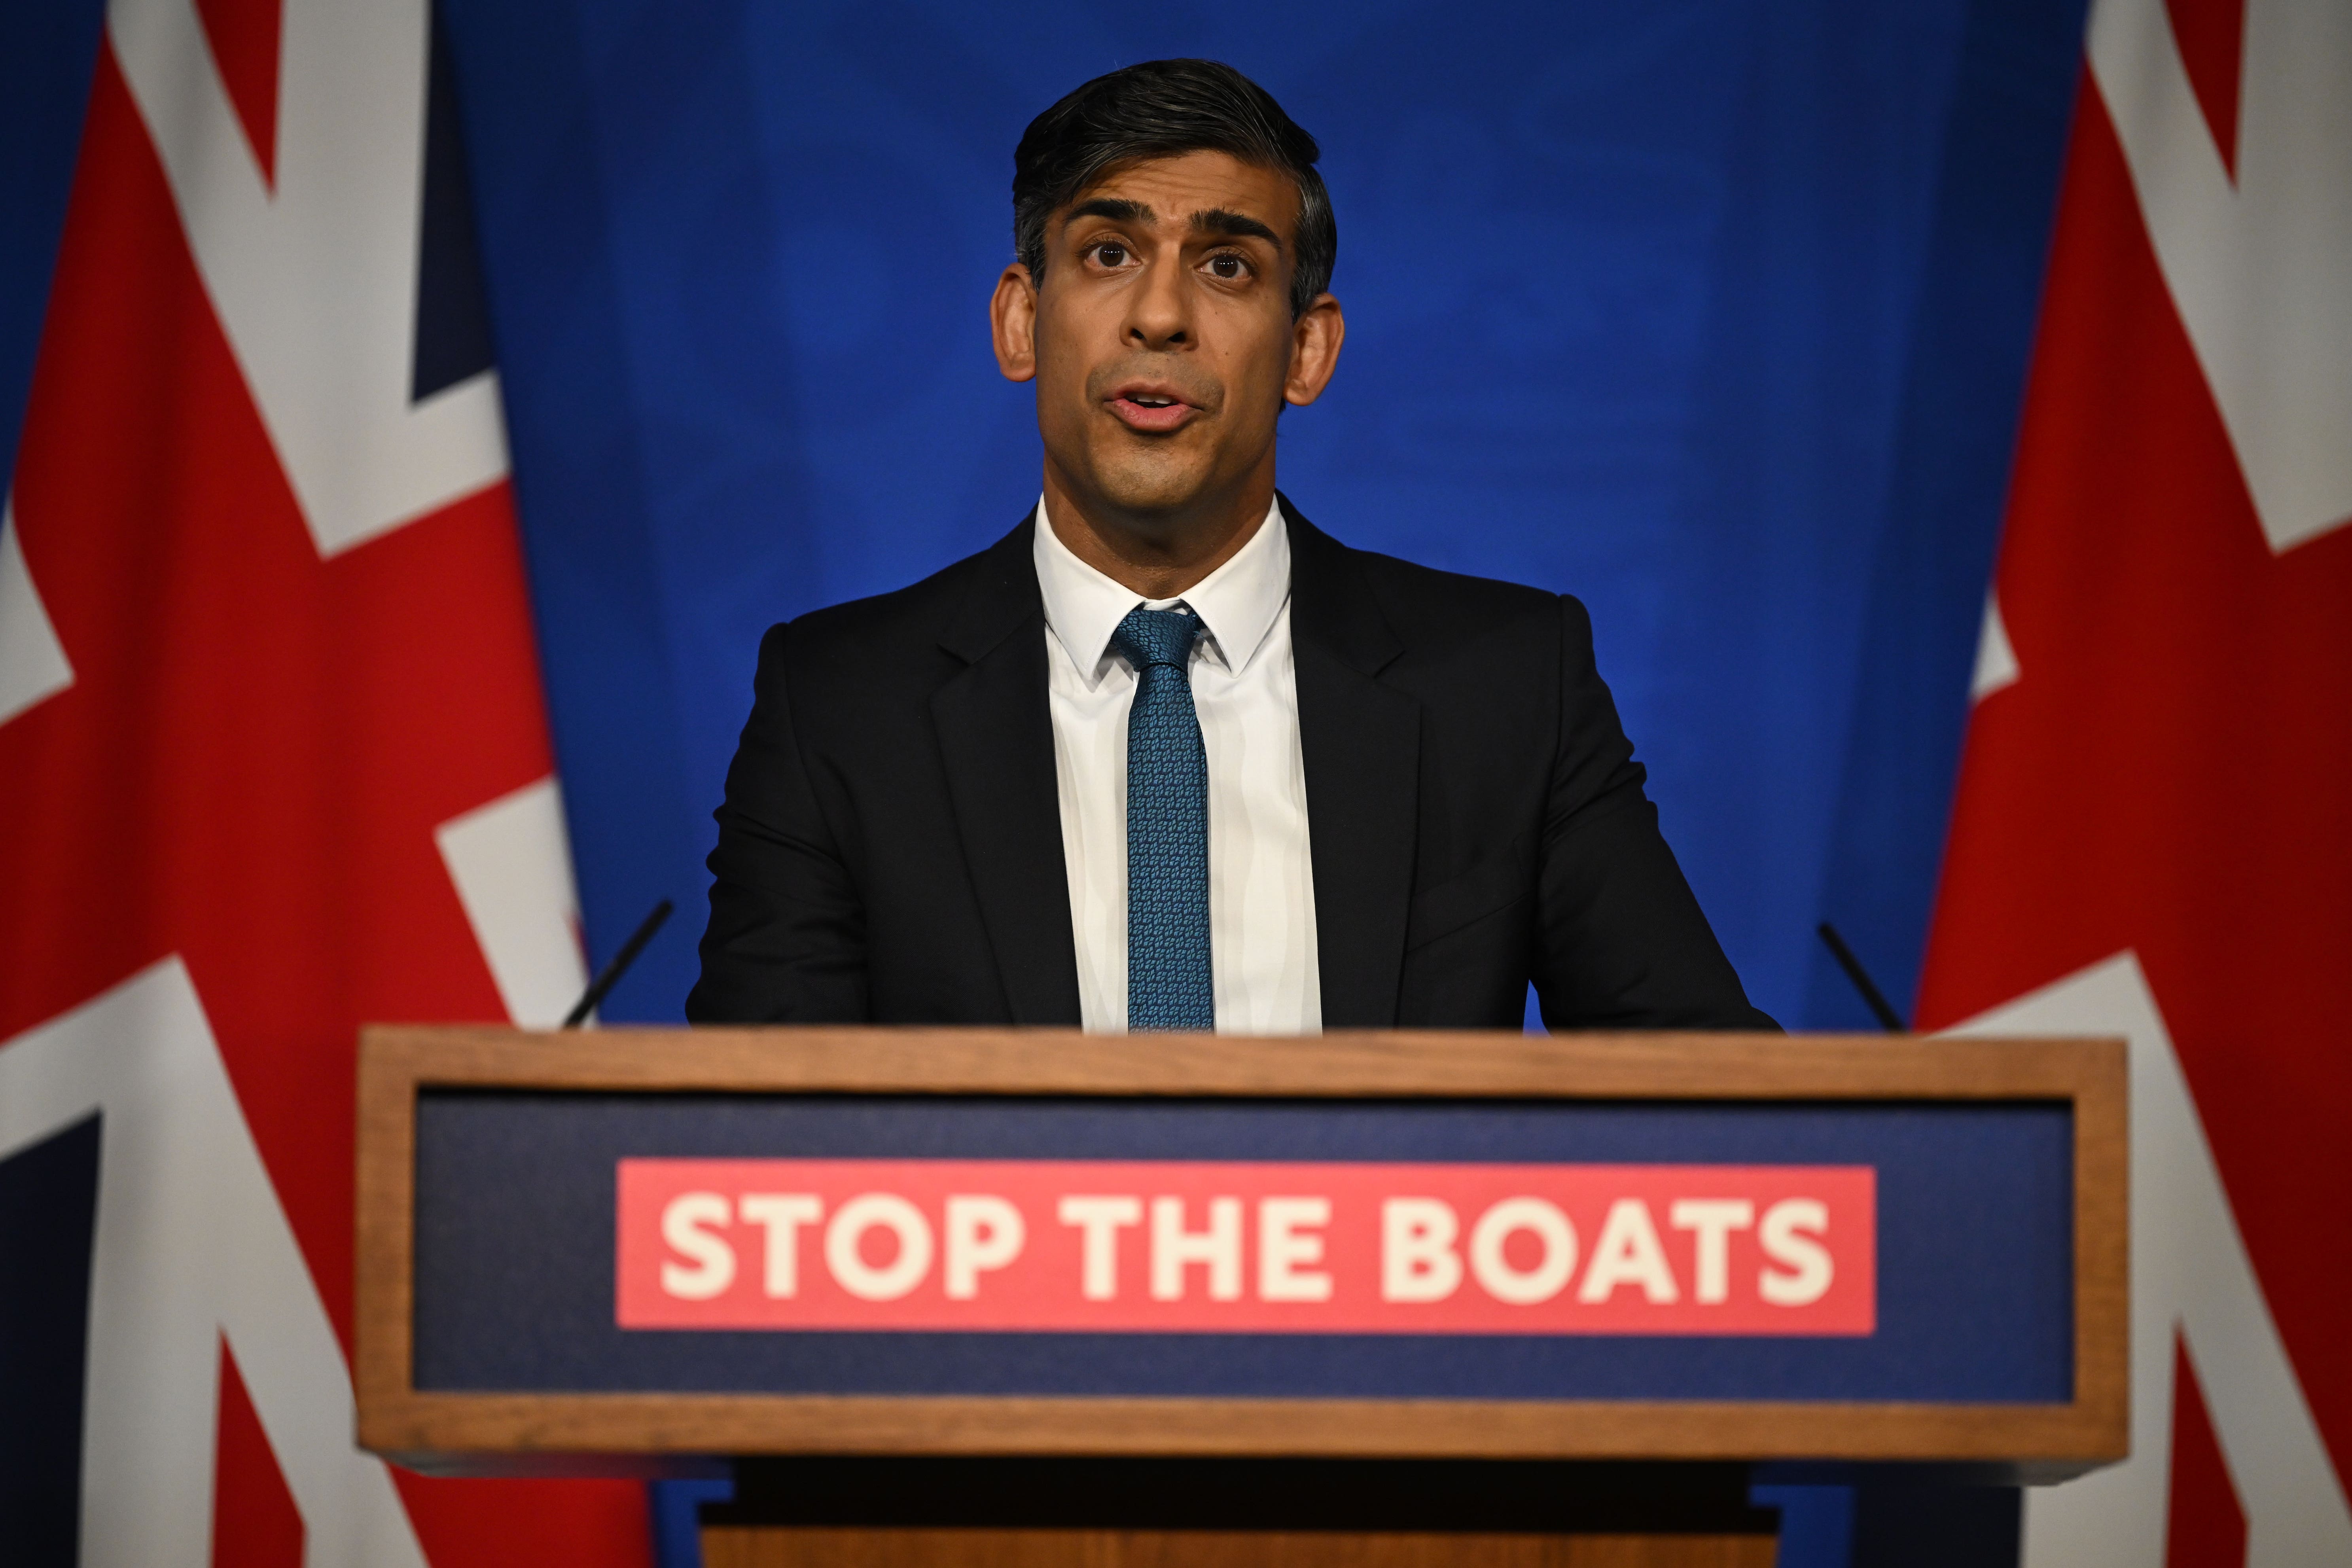 Prime minister Rishi Sunak has made stopping the boats a key pledge